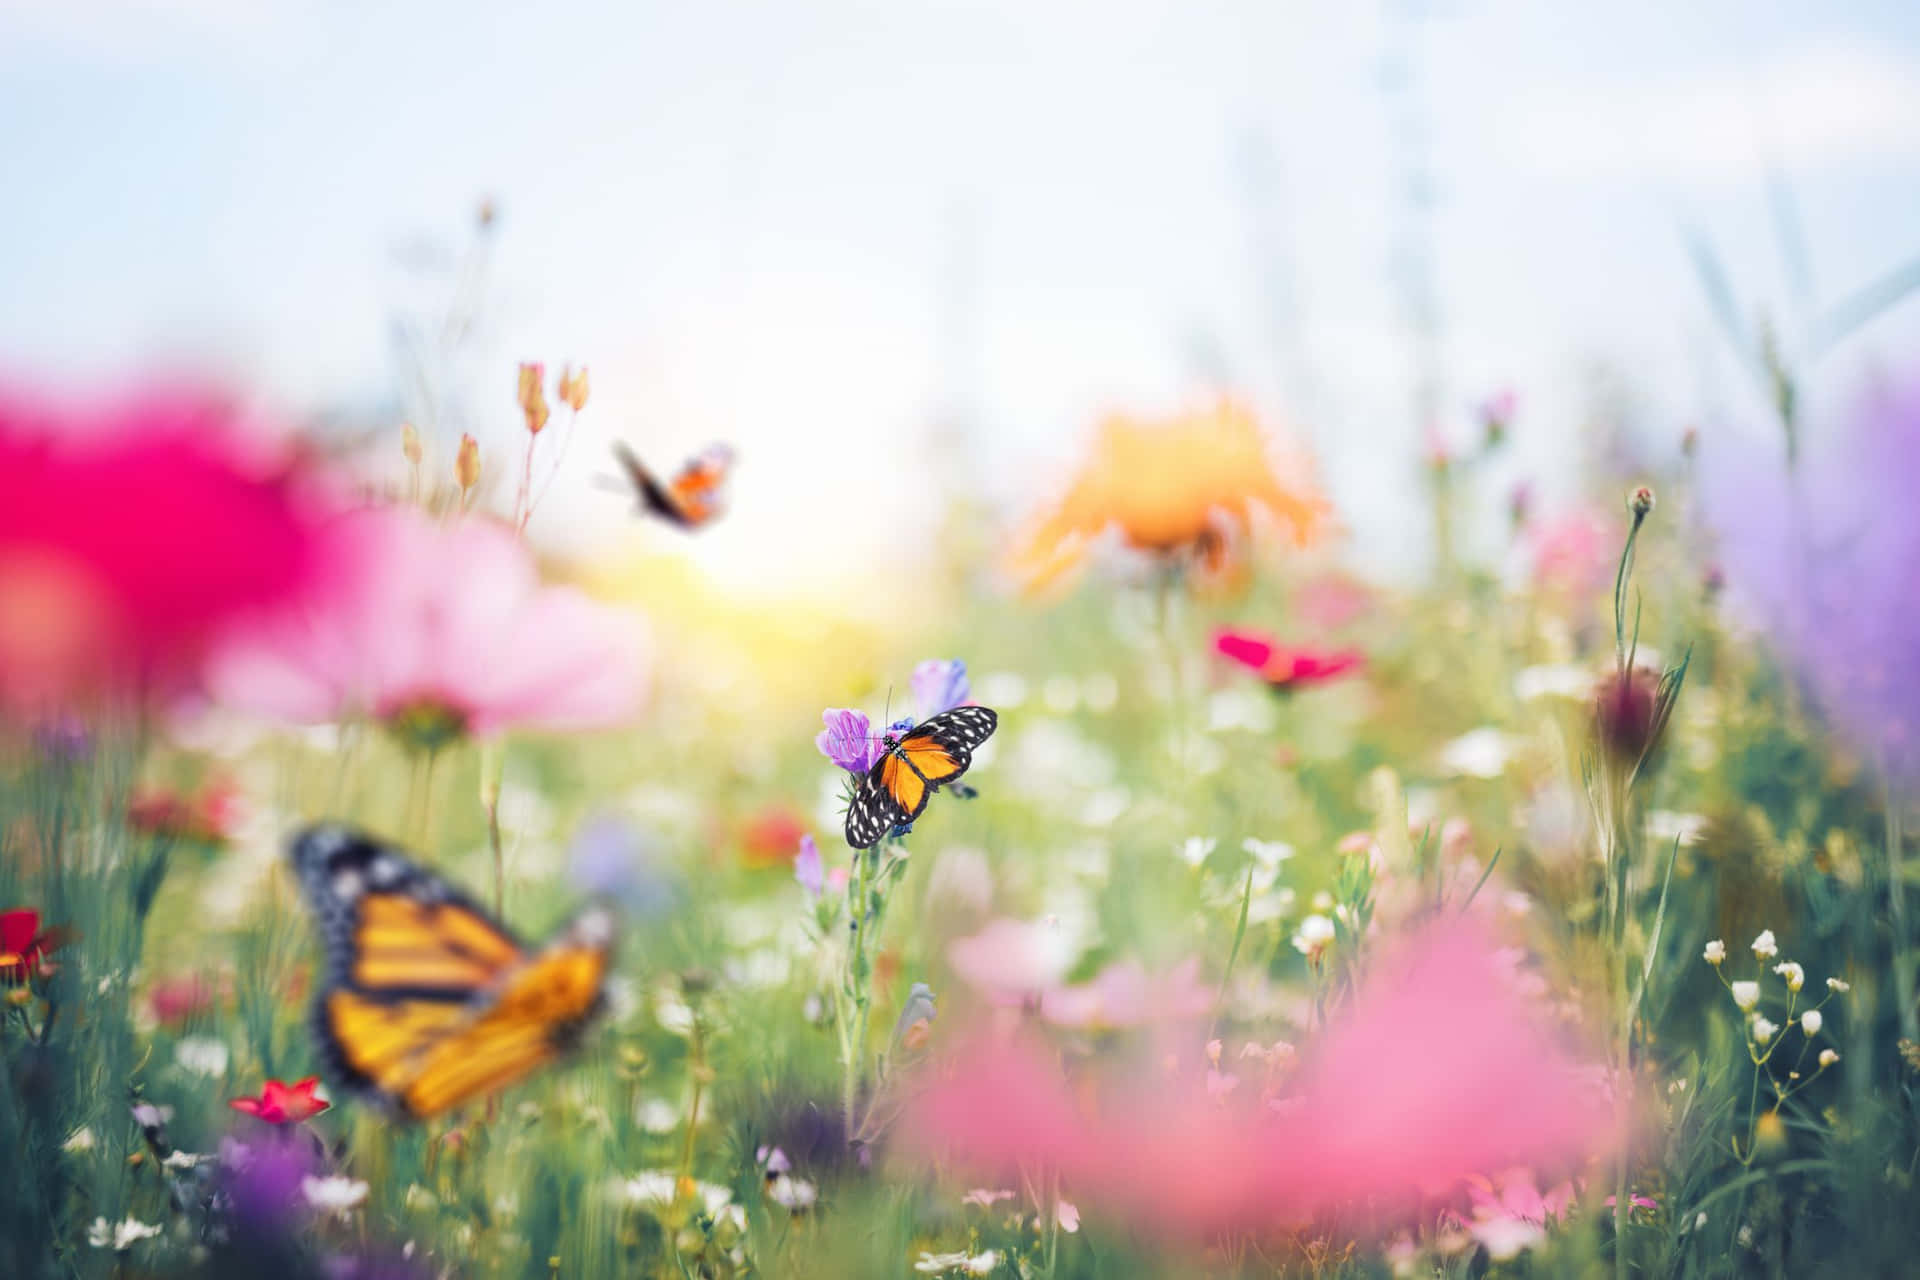 Get lost in nature's beauty in this Butterfly Garden Wallpaper